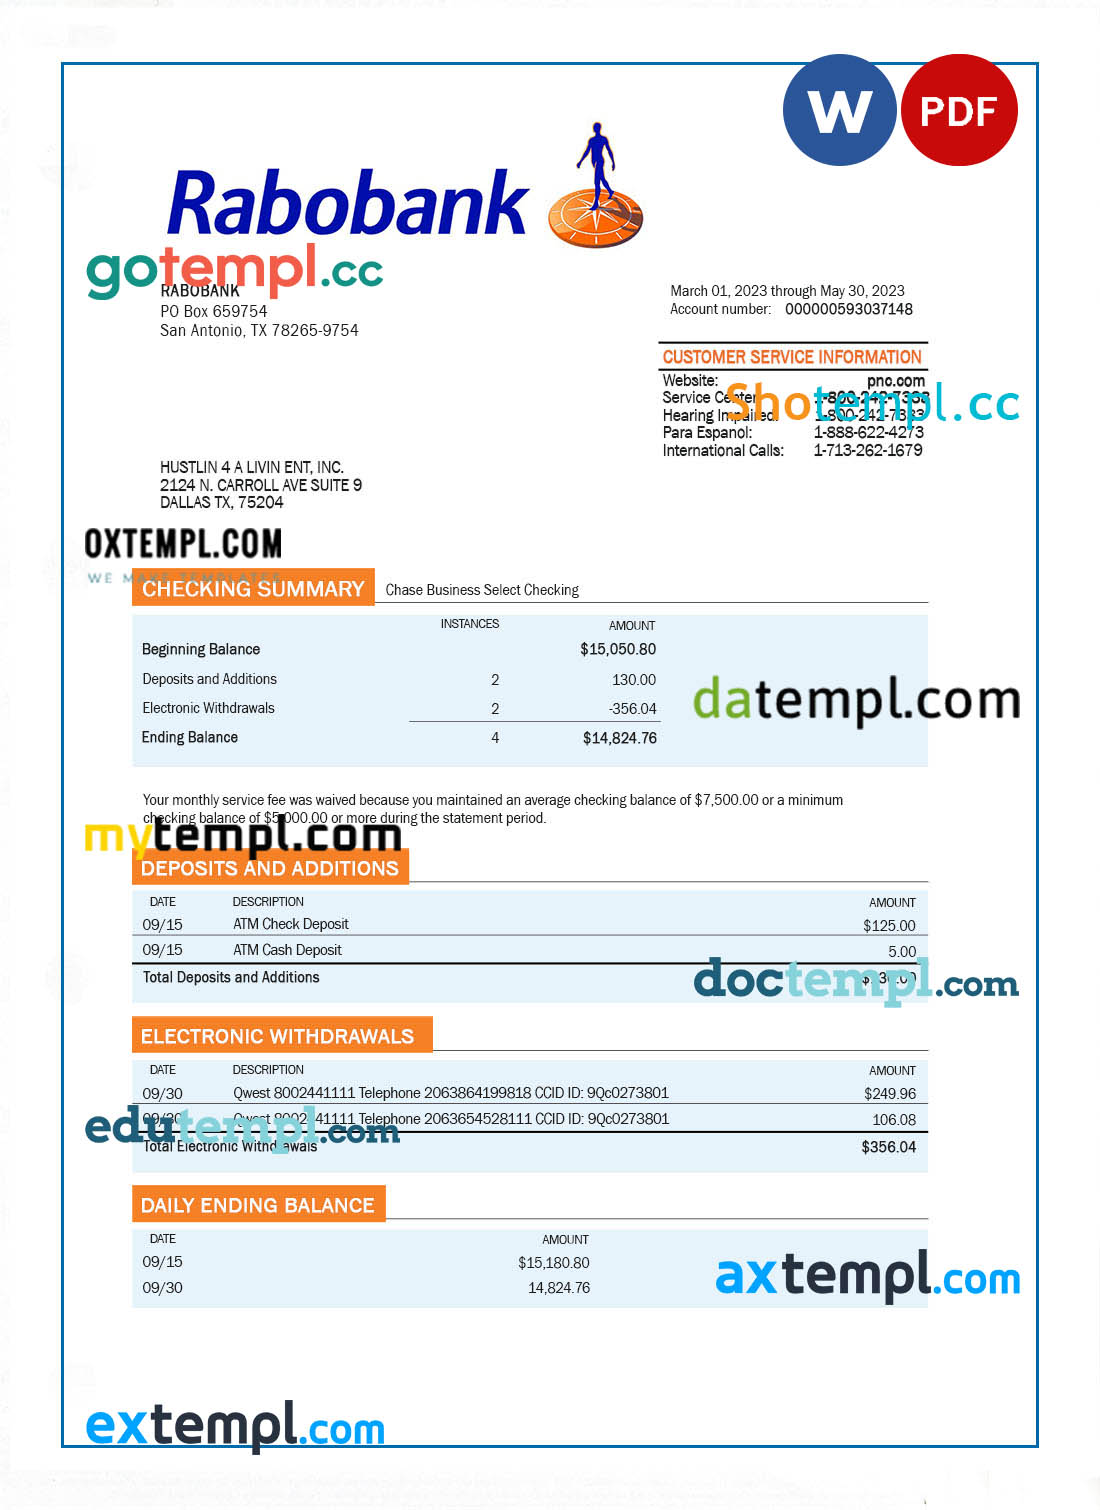 Rabobank bank organization account statement Word and PDF template